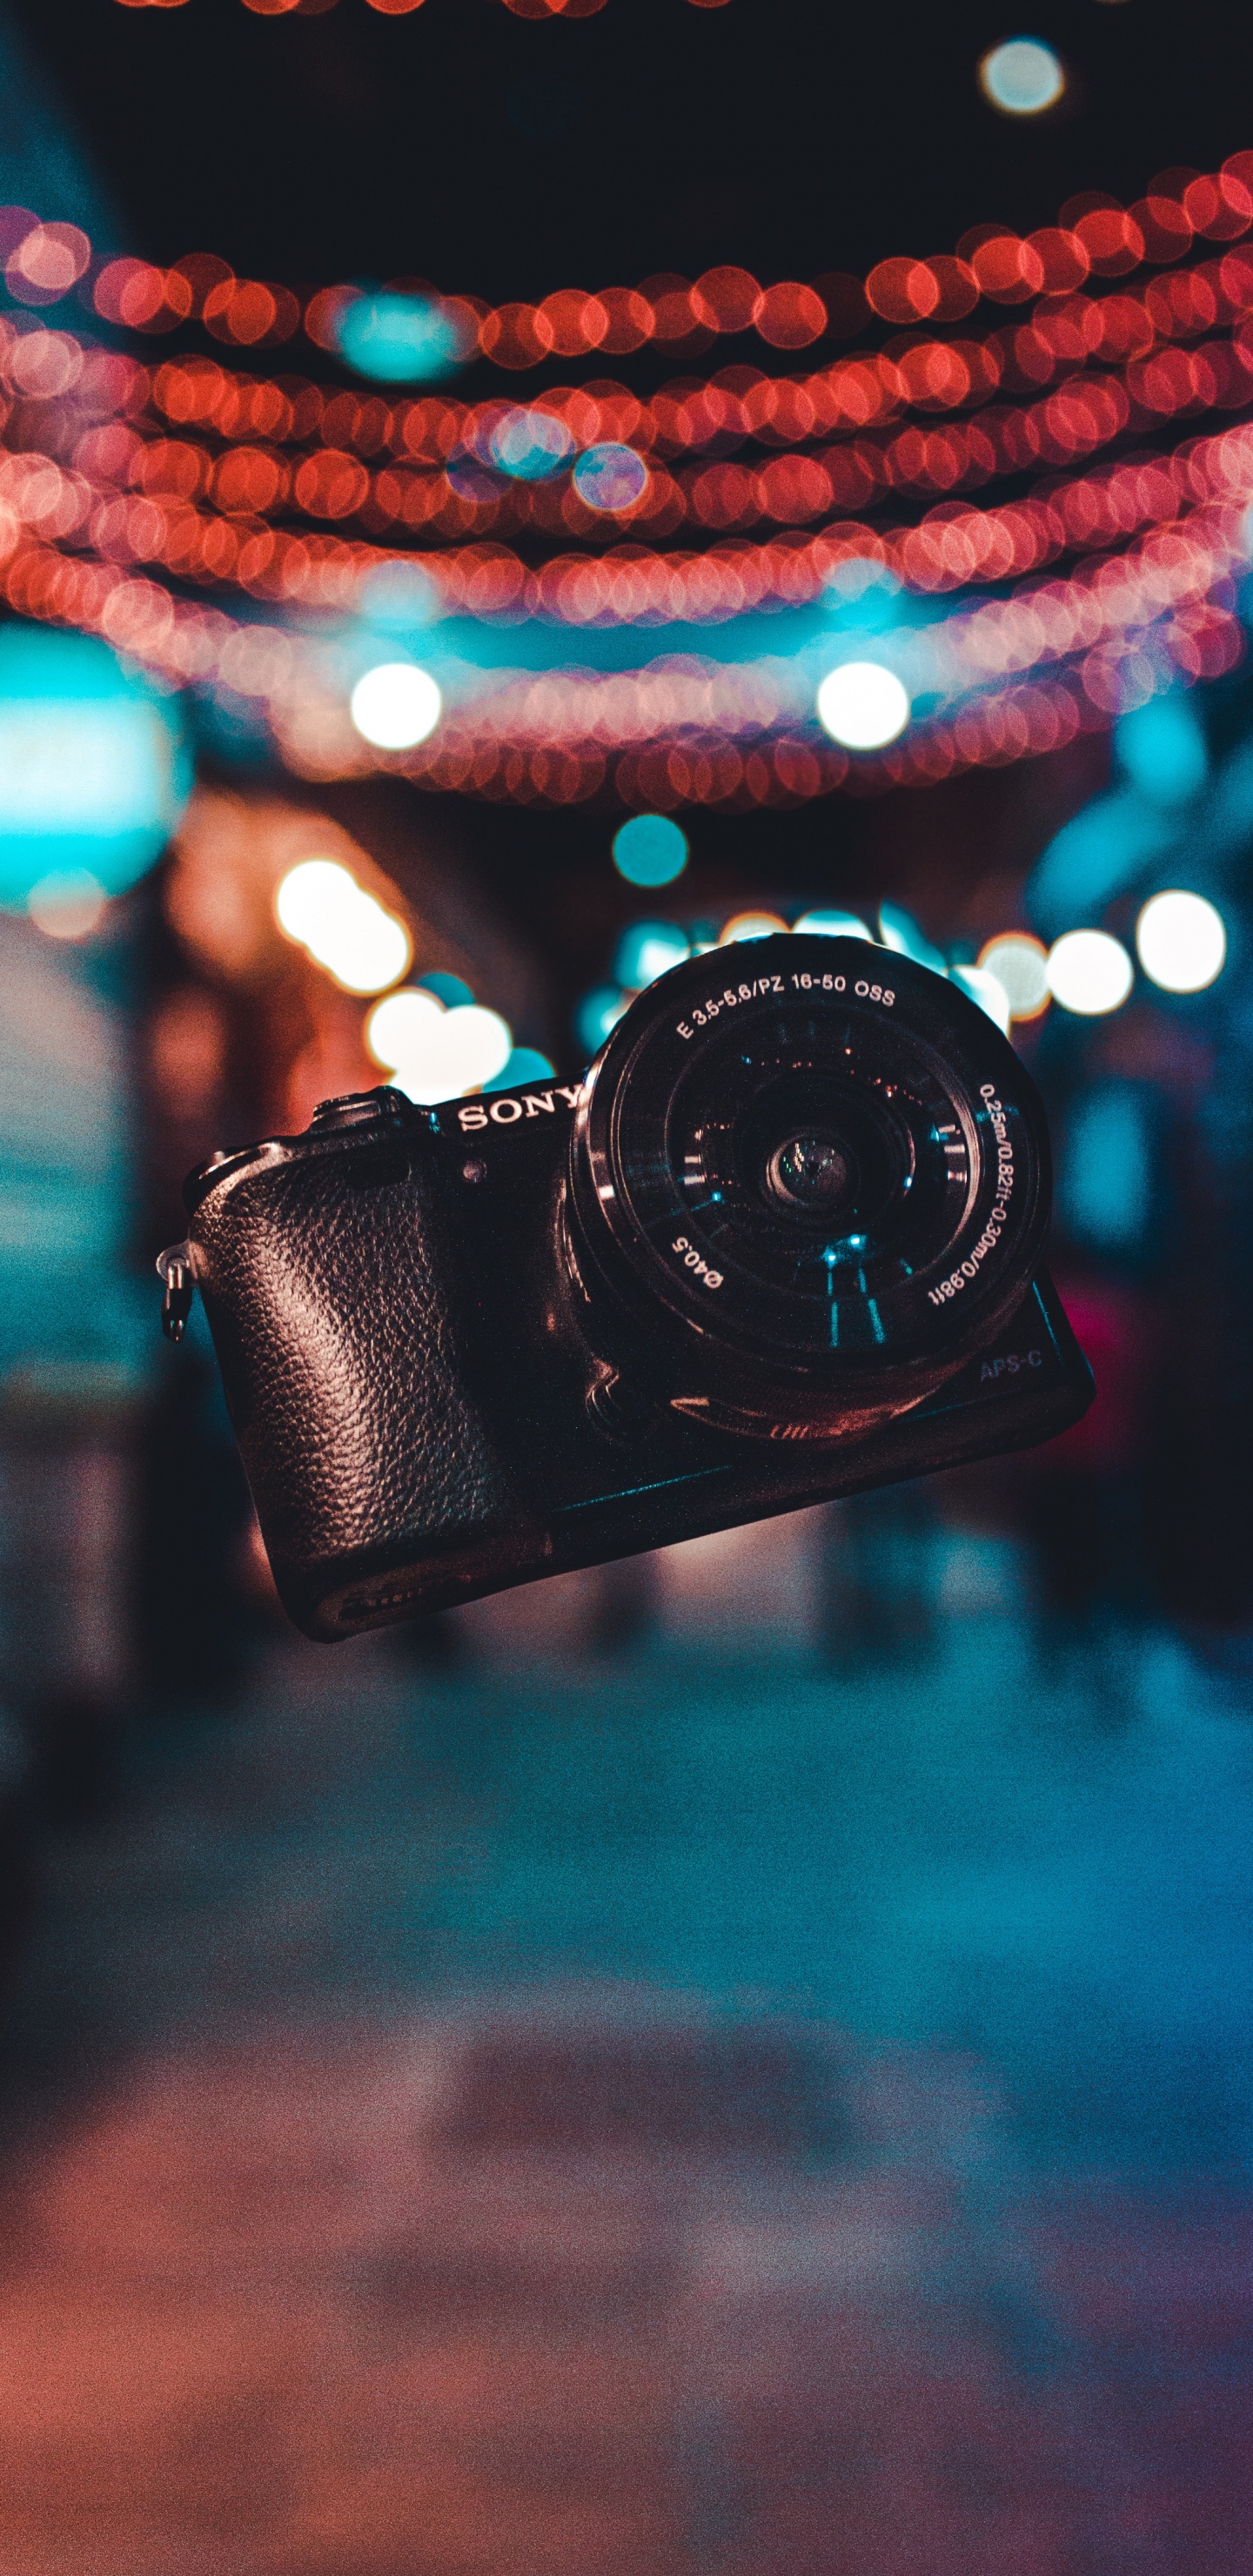 Black Dslr Camera on Blue and White String Lights. Wallpaper in 1440x2960 Resolution